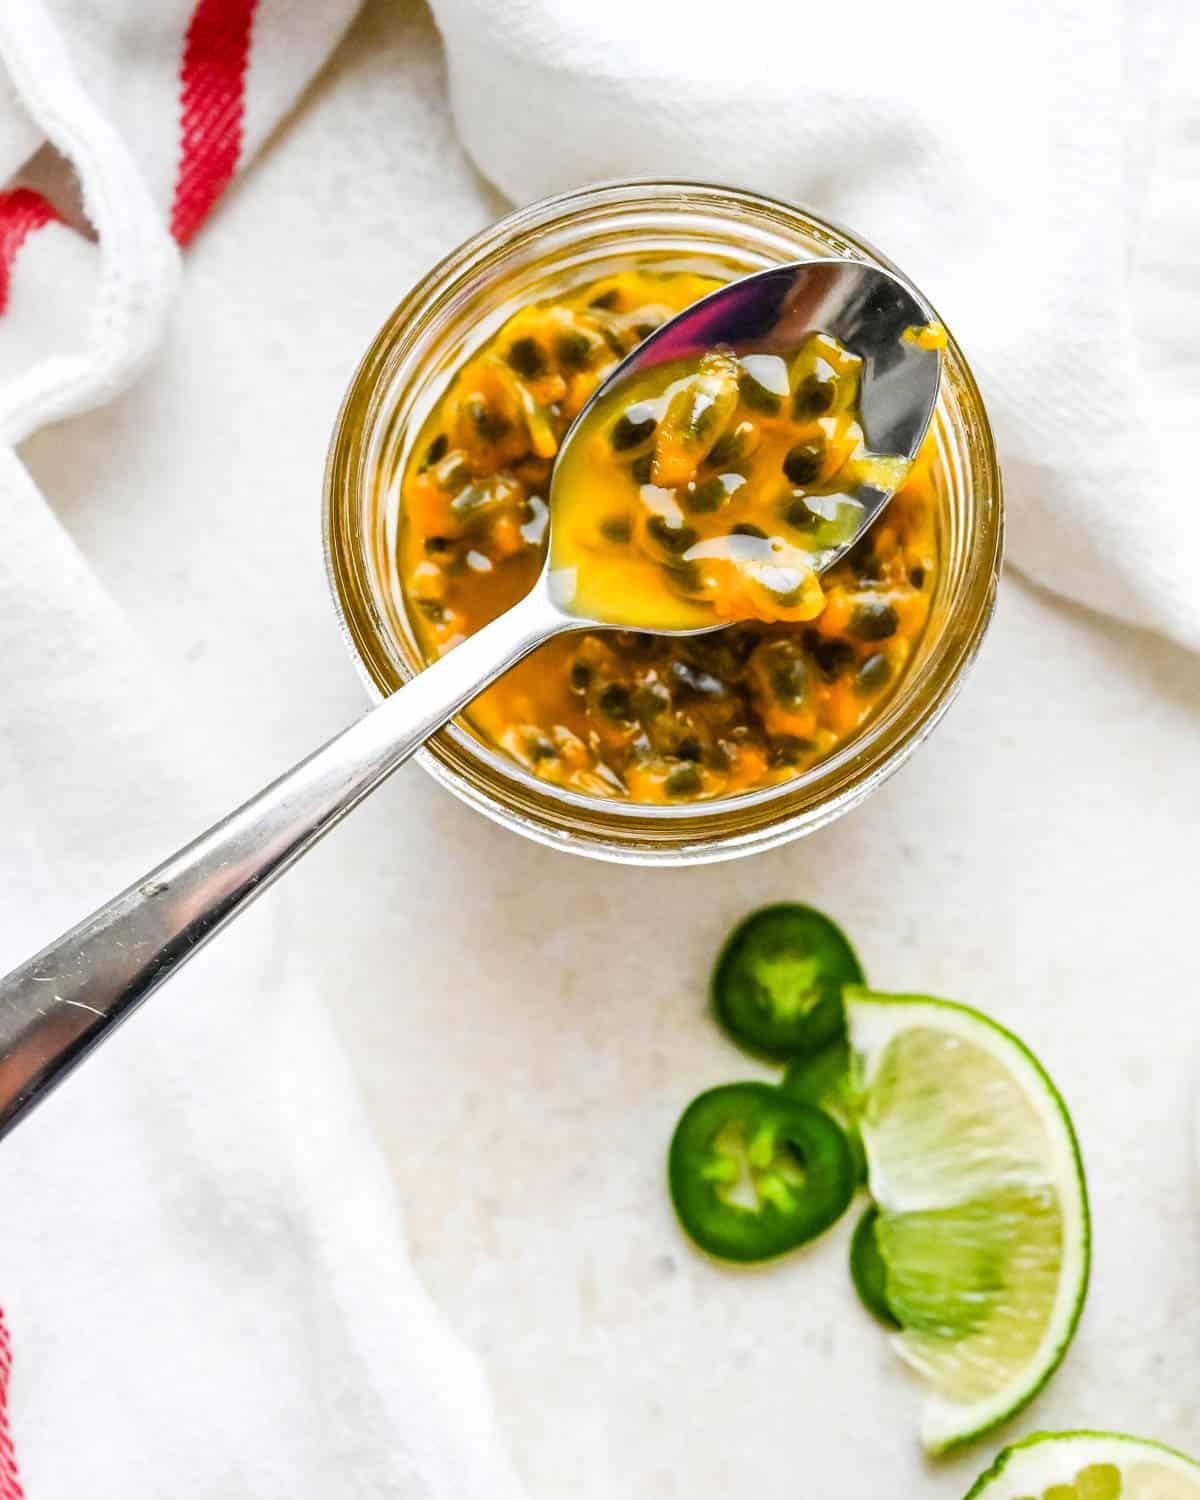 Passion fruit pulp in a glass jar.